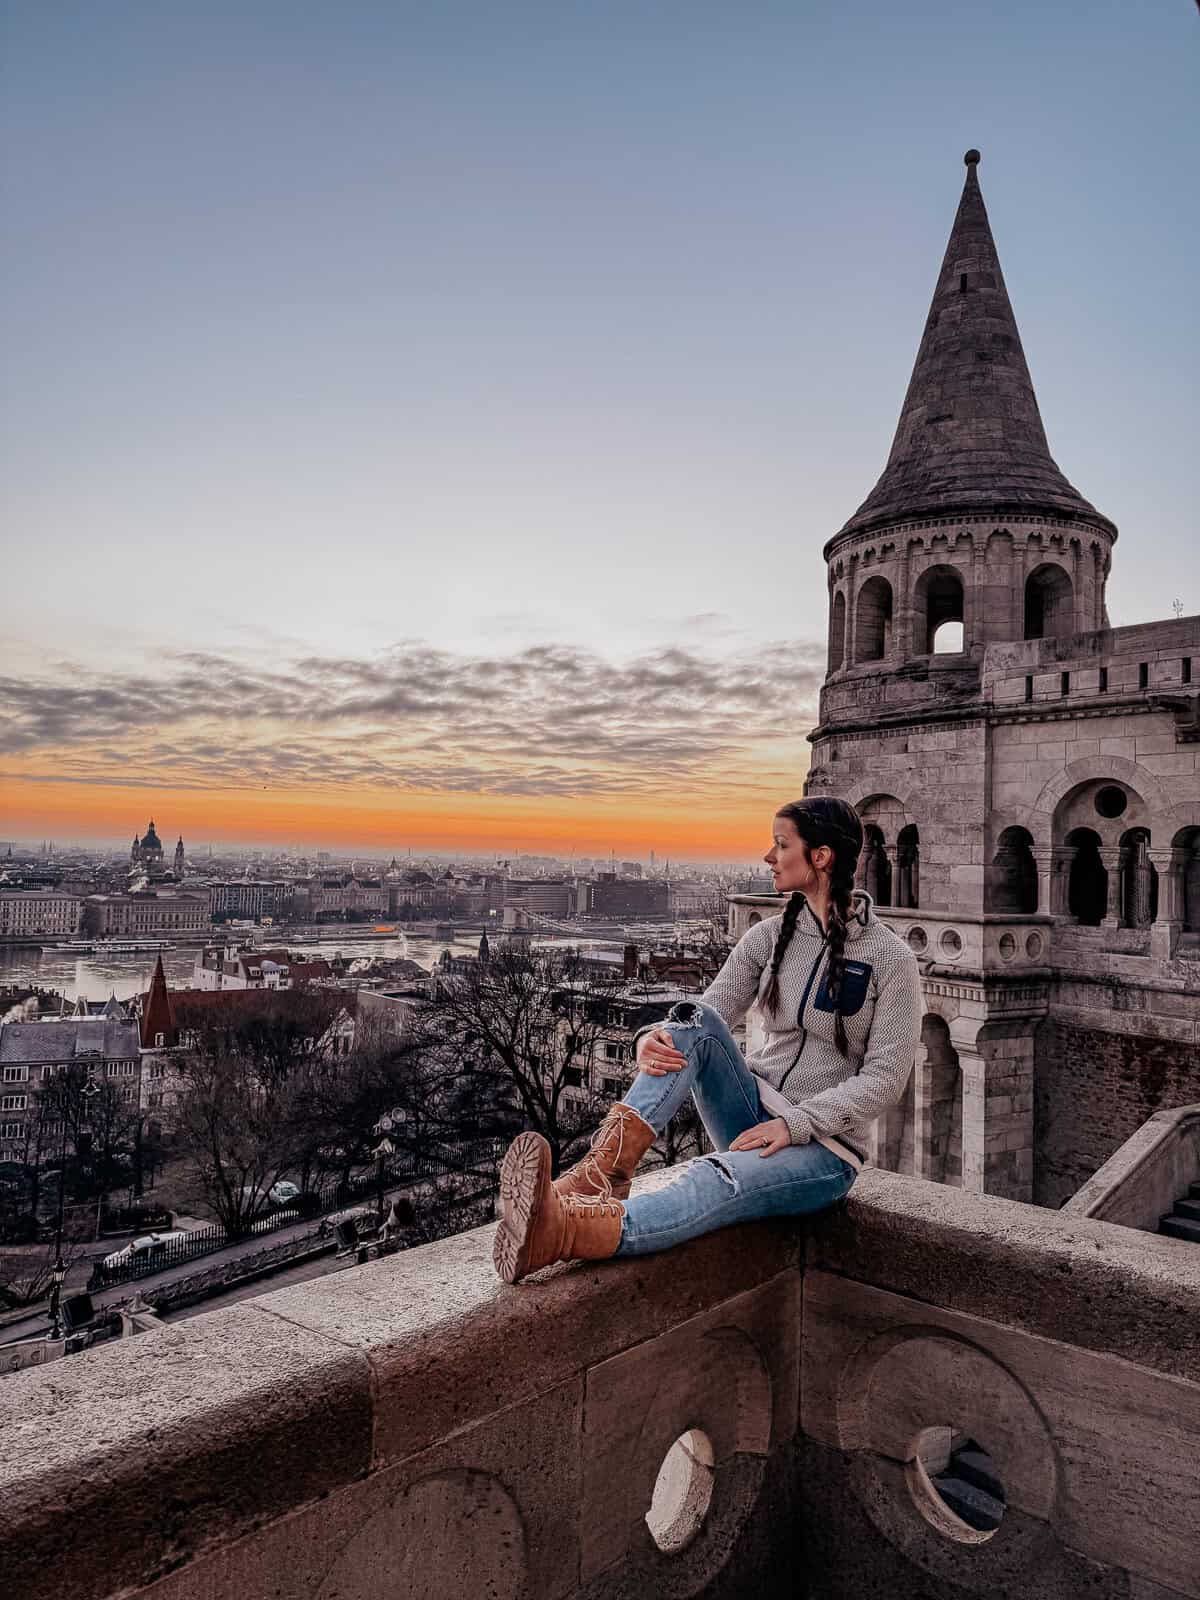 A woman sitting on the edge of Fisherman's Bastion in Budapest, enjoying a sunset view over the city and the Danube River